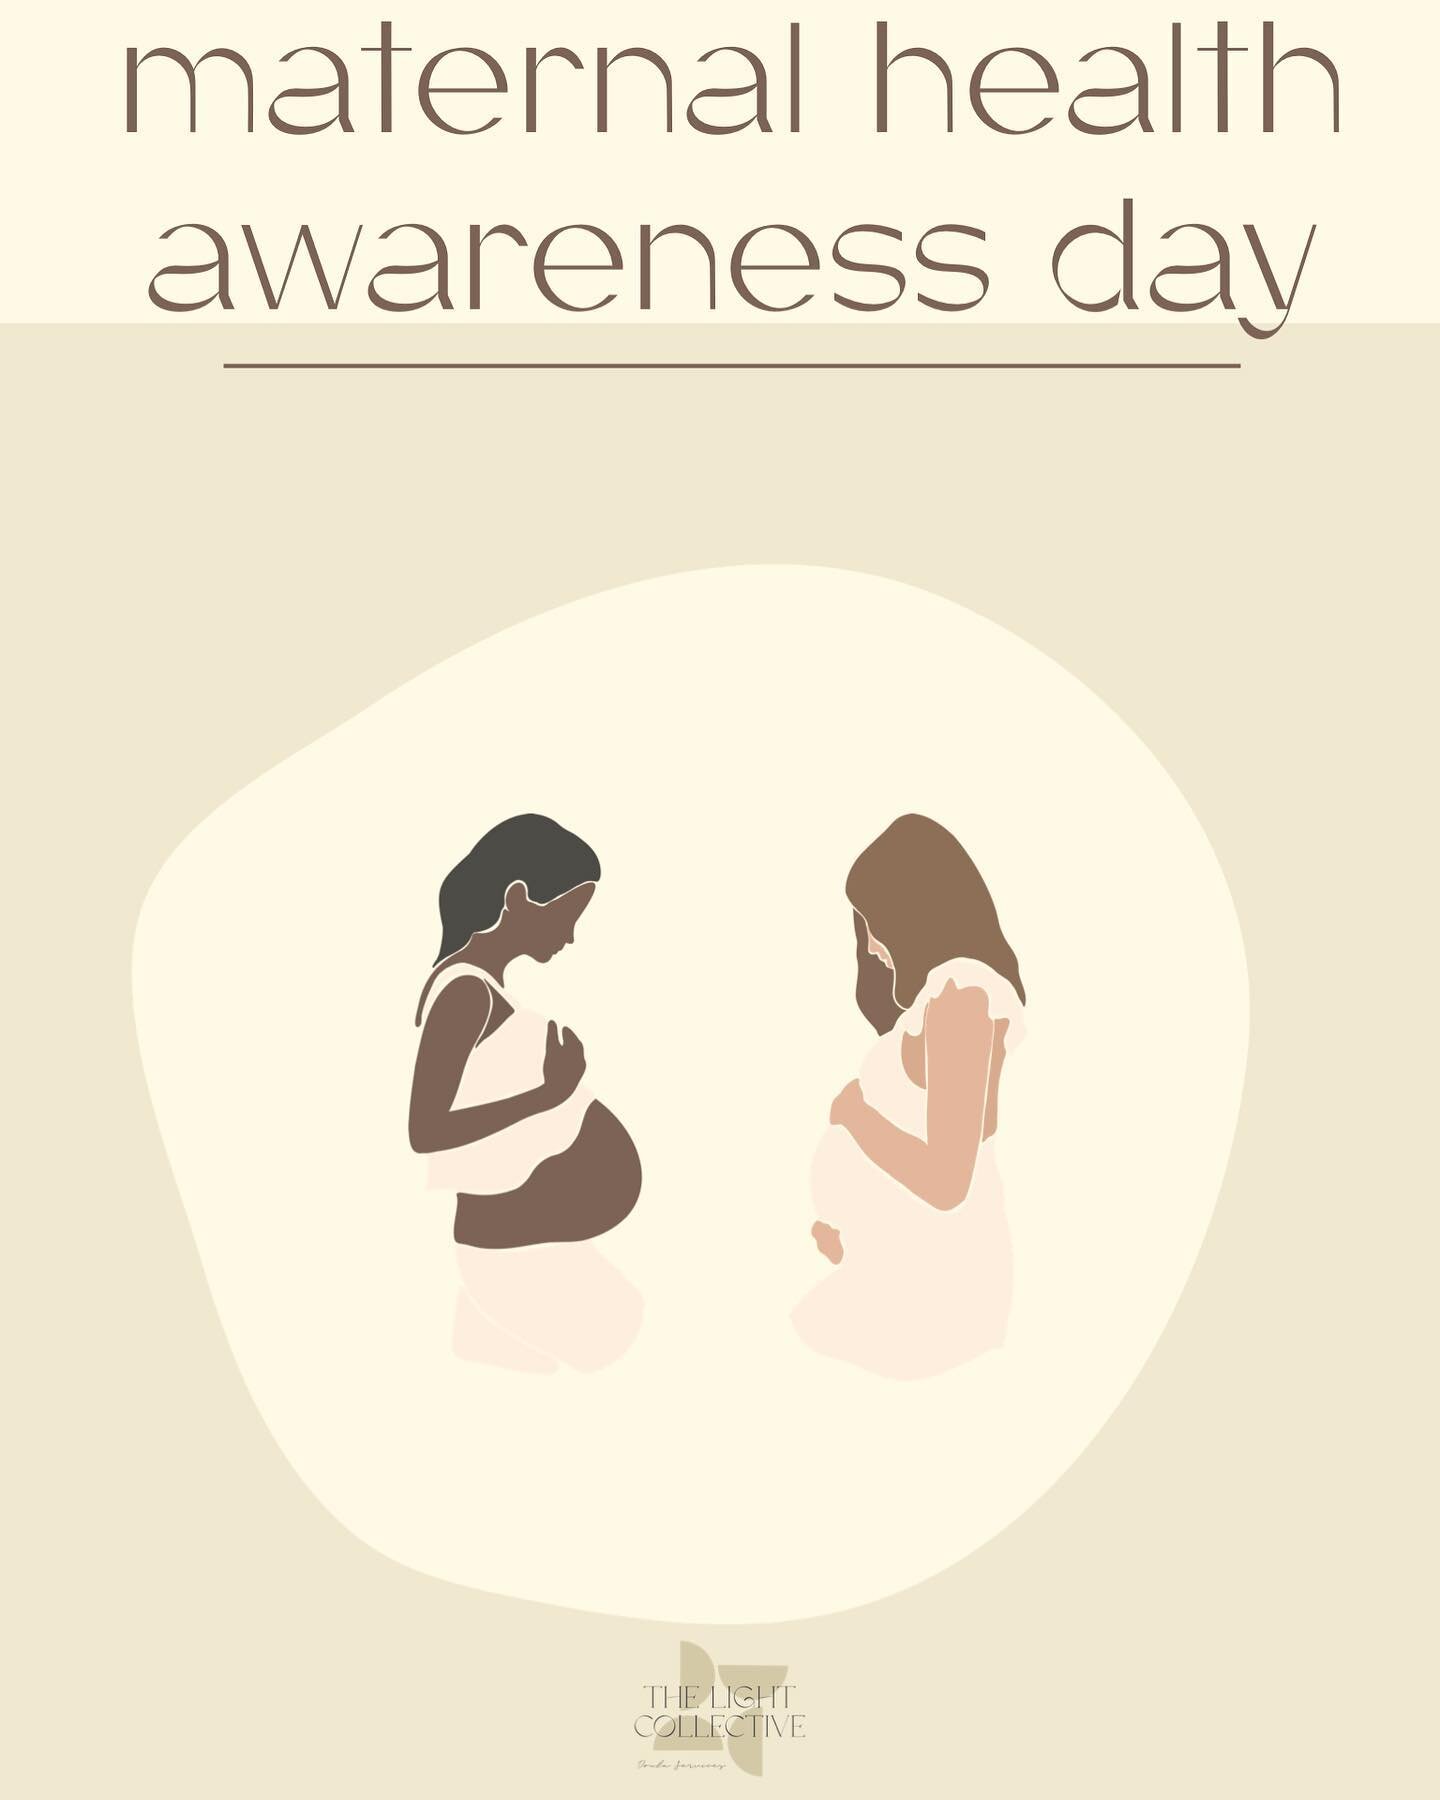 On this #maternalhealthawarenessday it&rsquo;s not just about physical health, but mental health as well. Mental health conditions are being reported as a leading underlying cause of pregnancy related deaths. These deaths are preventable. 

Pregnant 